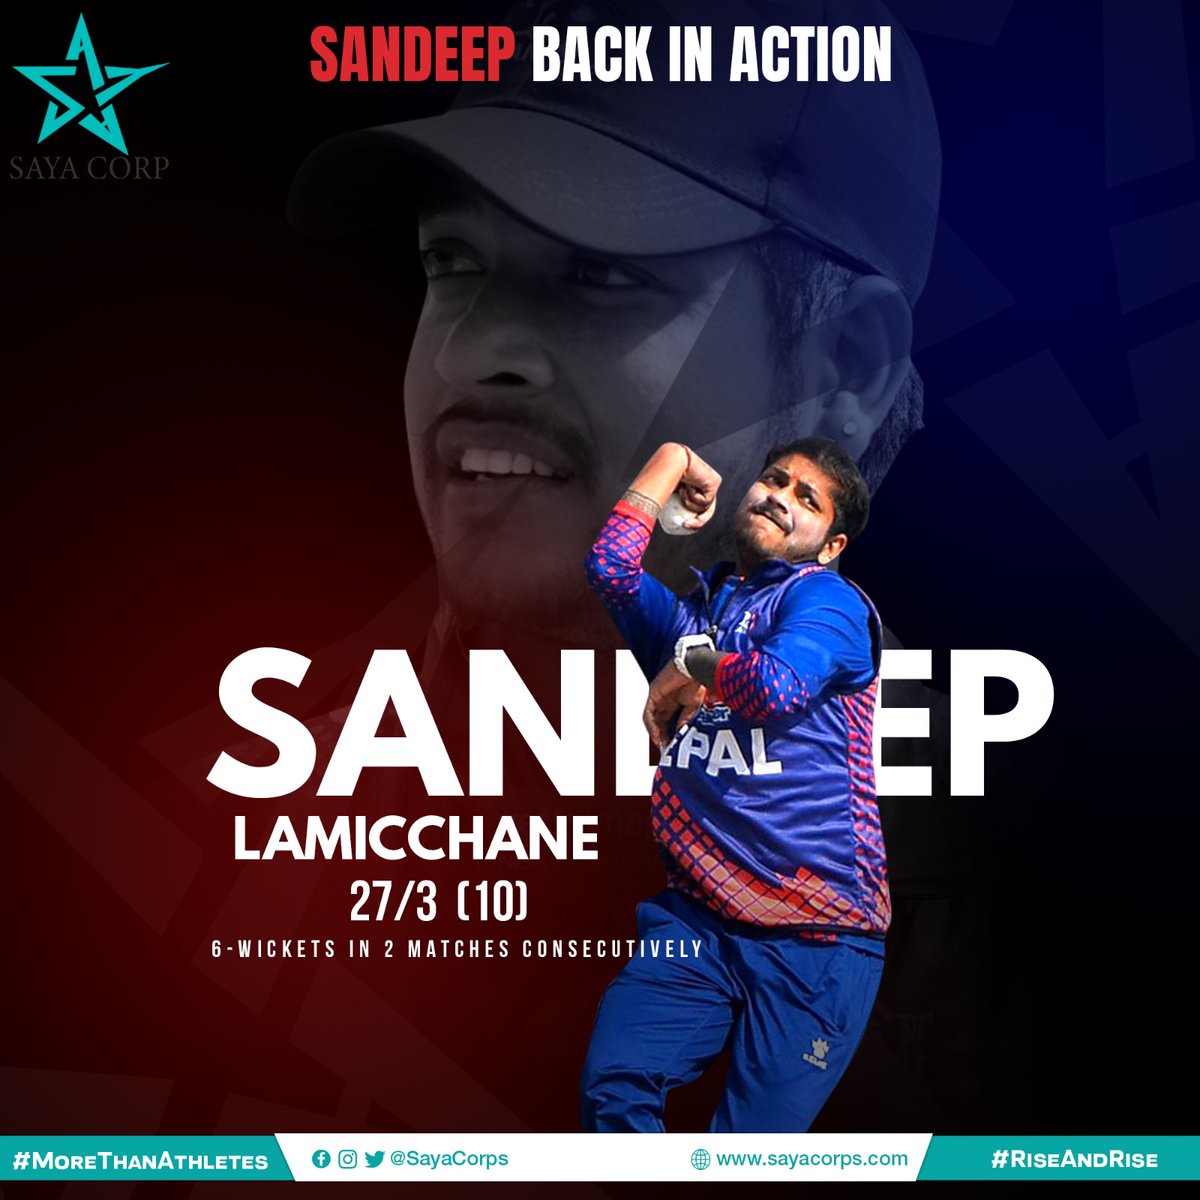 ✨ 3-fer in the previous match ✅
✨ 3-fer in the current match ✅

@Sandeep25 is back with a bang 💥 The boy from Nepal was once again the key man.

#MoreThanAthletes #RiseAndRise #SayaCorporation @TalhaAisham